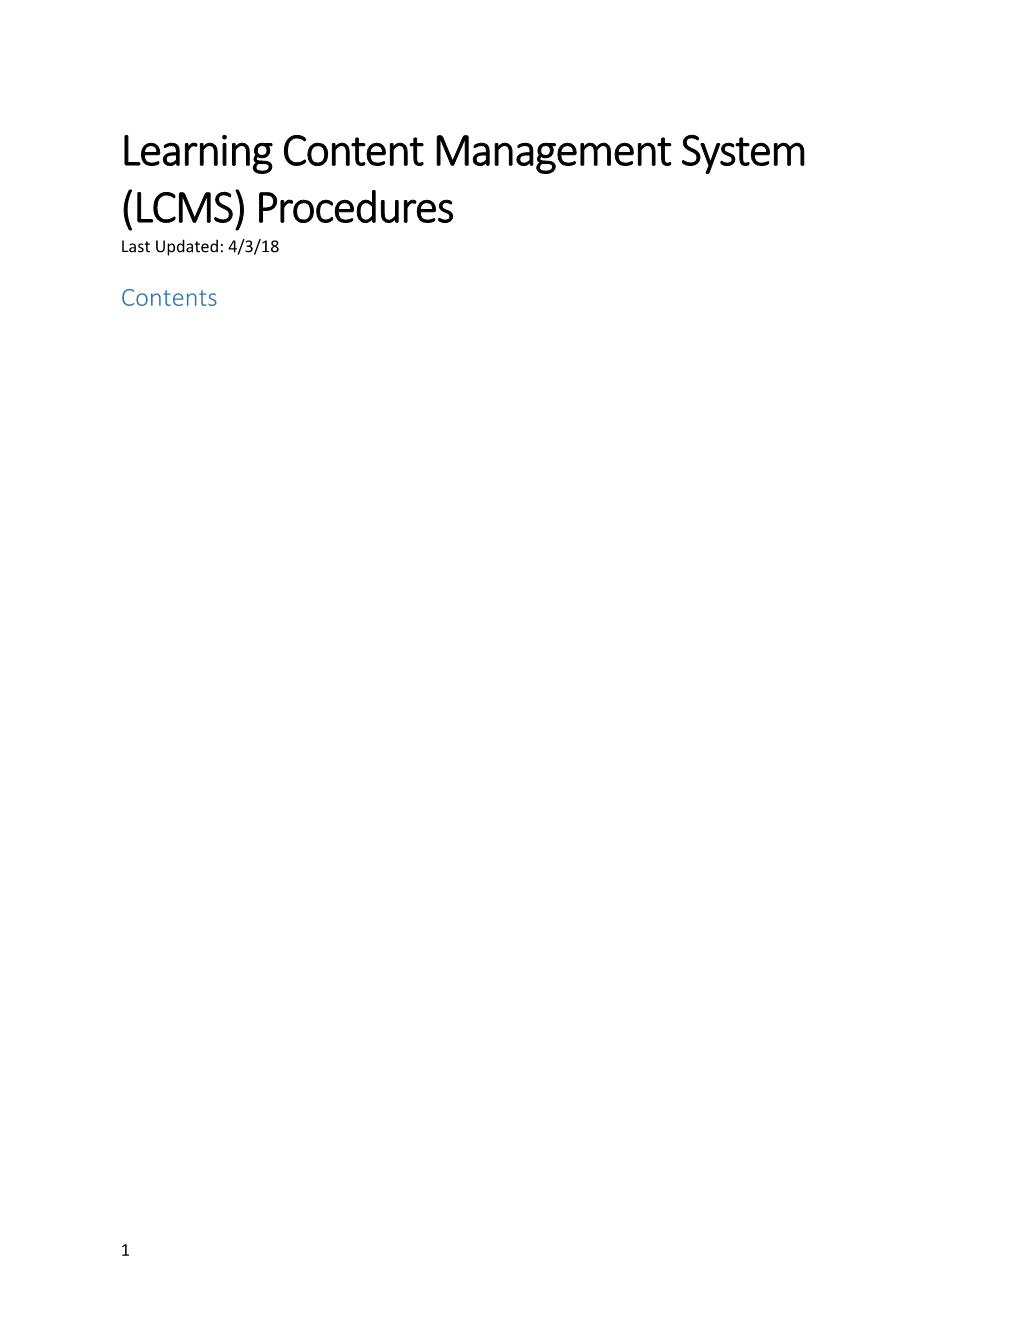 Learning Content Management System (LCMS) Procedures